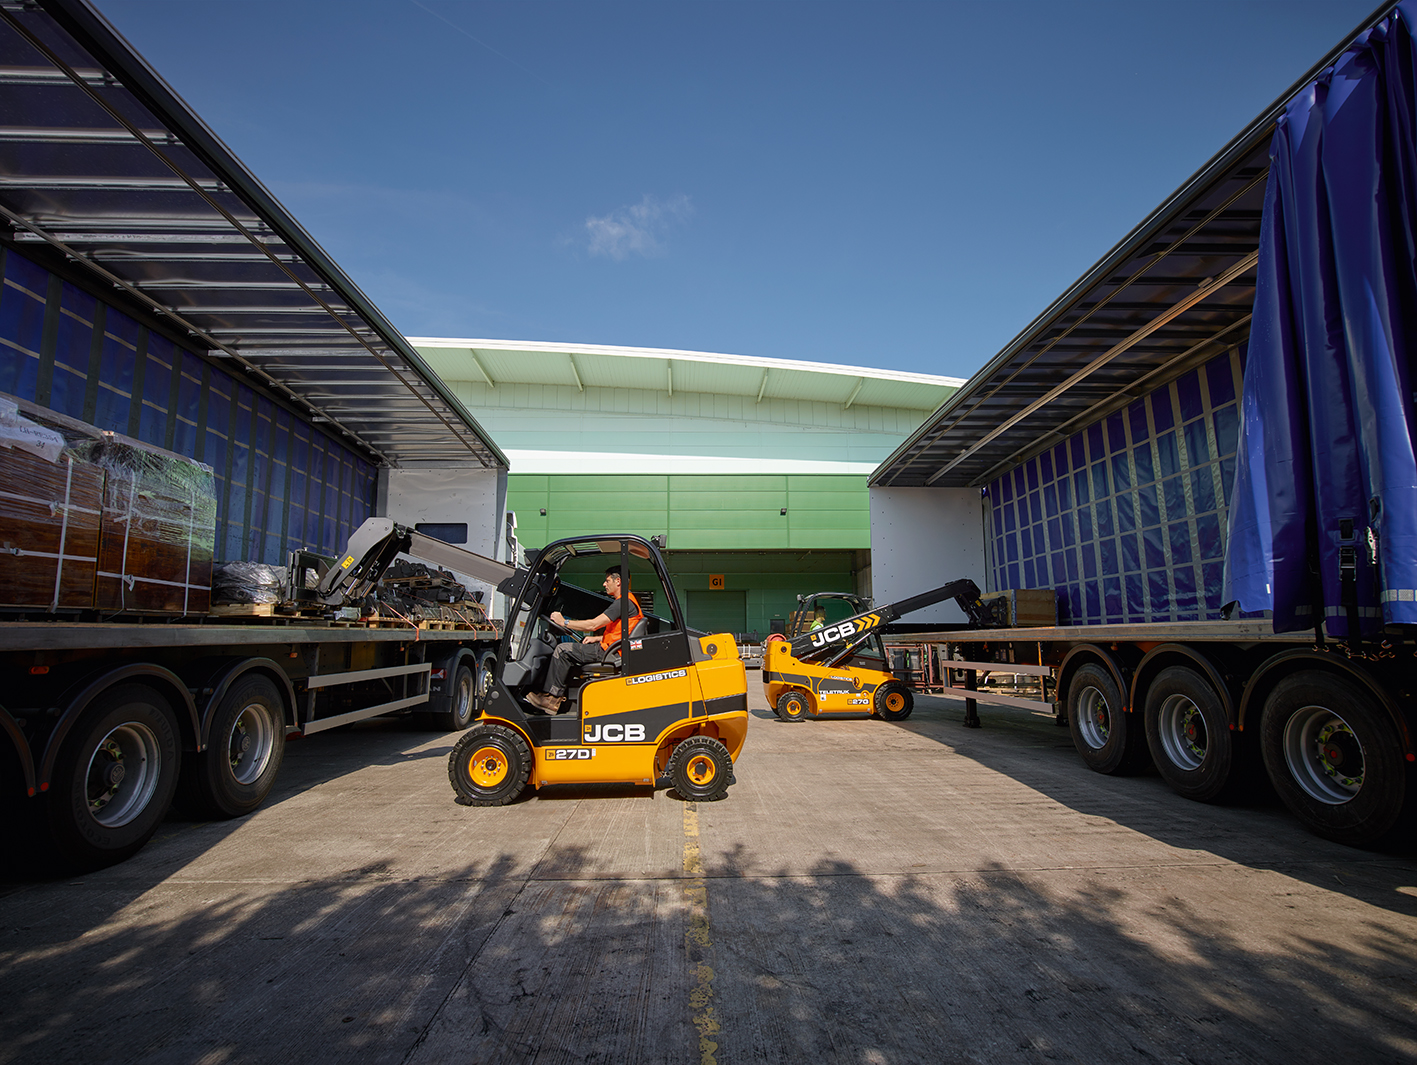 JCB Makes Use of Its Outside Storage Space